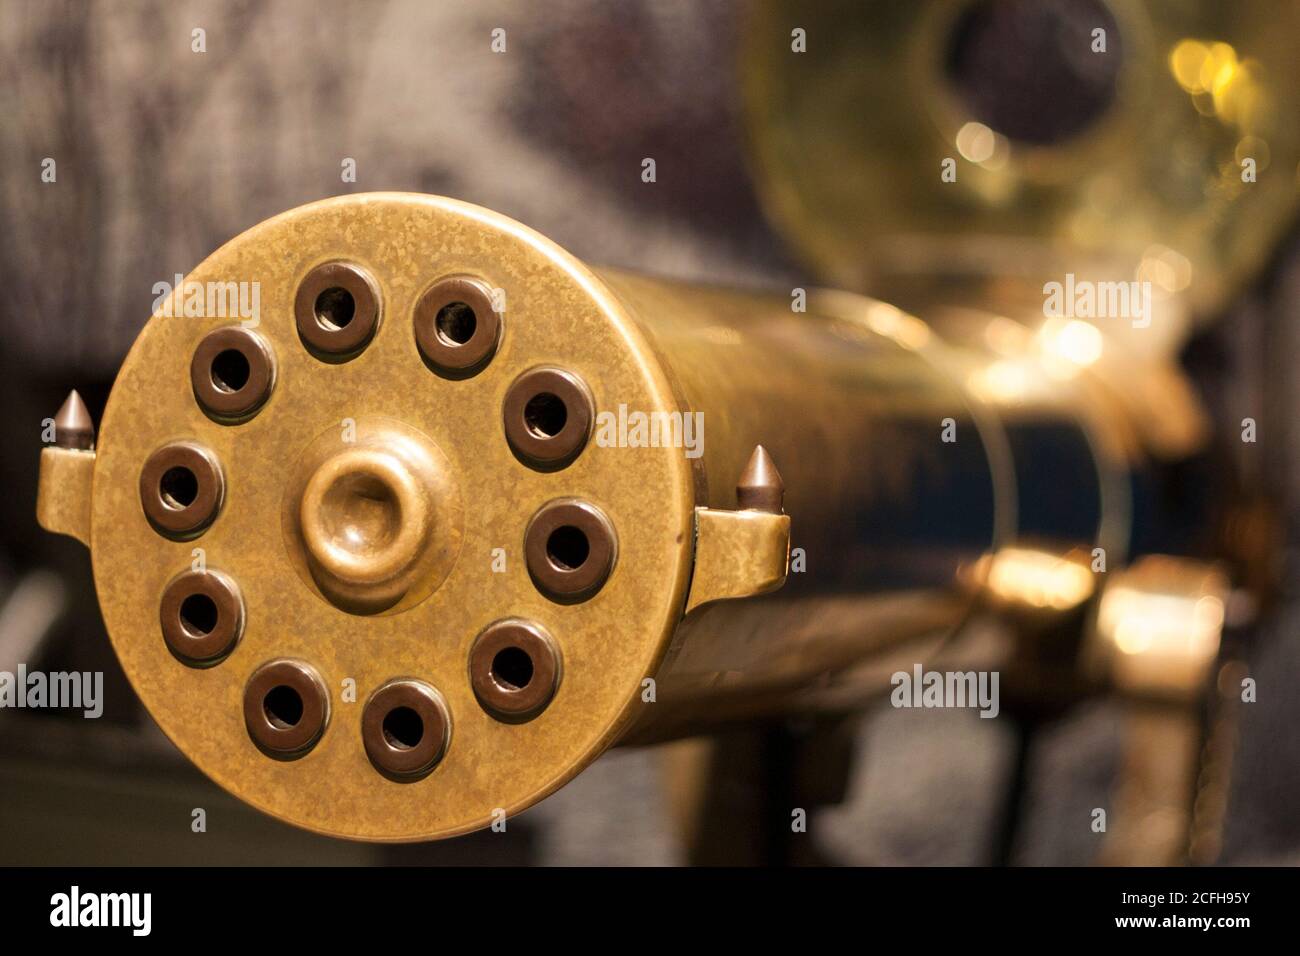 Gatling Gun Muzzle: The muzzle of a brass ten chamber rotating barrel gun used during the first world war. A large sight is in the background. Stock Photo